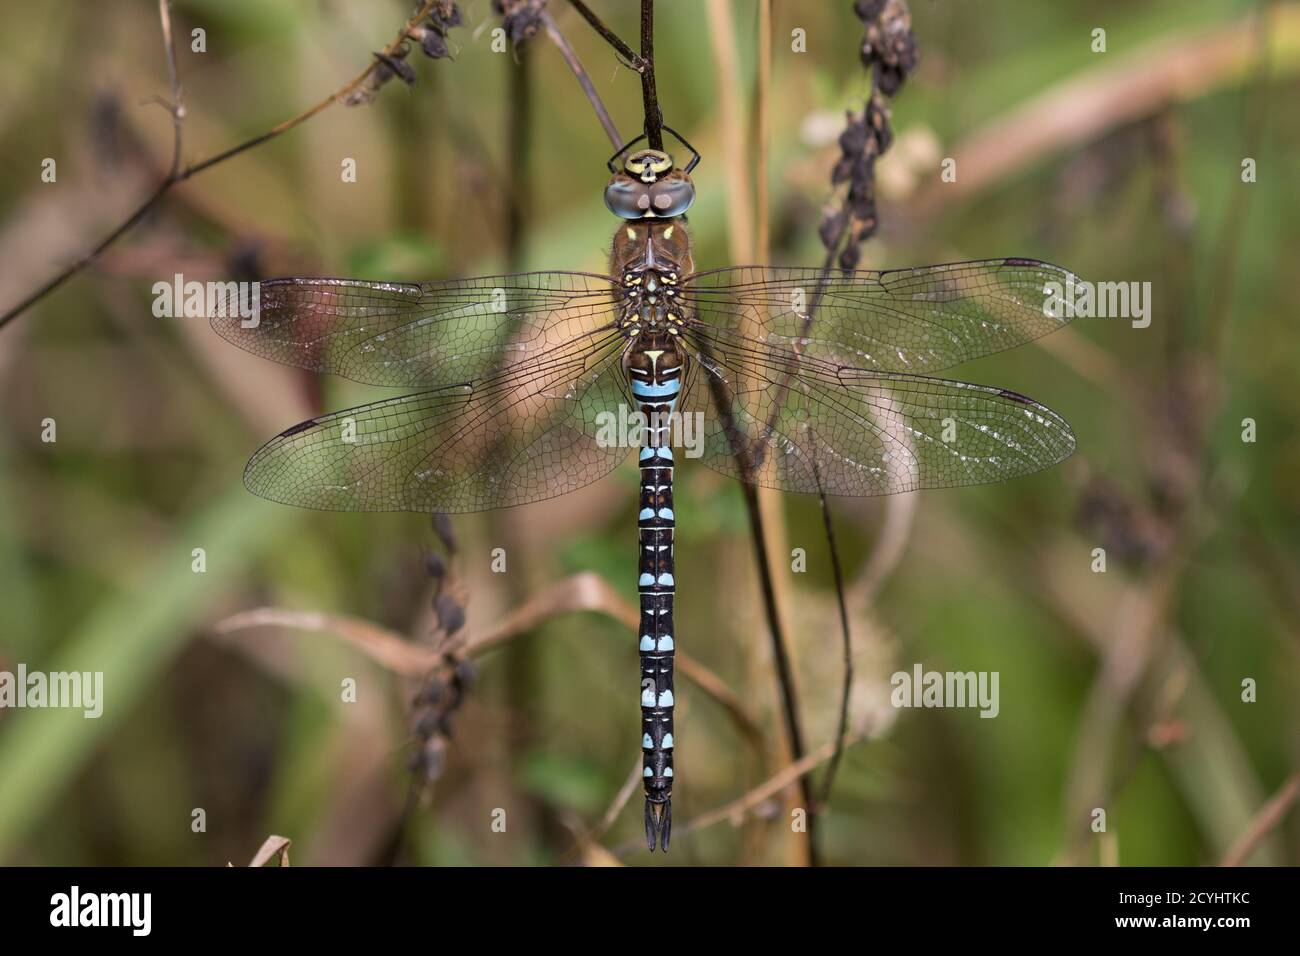 Southern hawker dragonfly resting Stock Photo